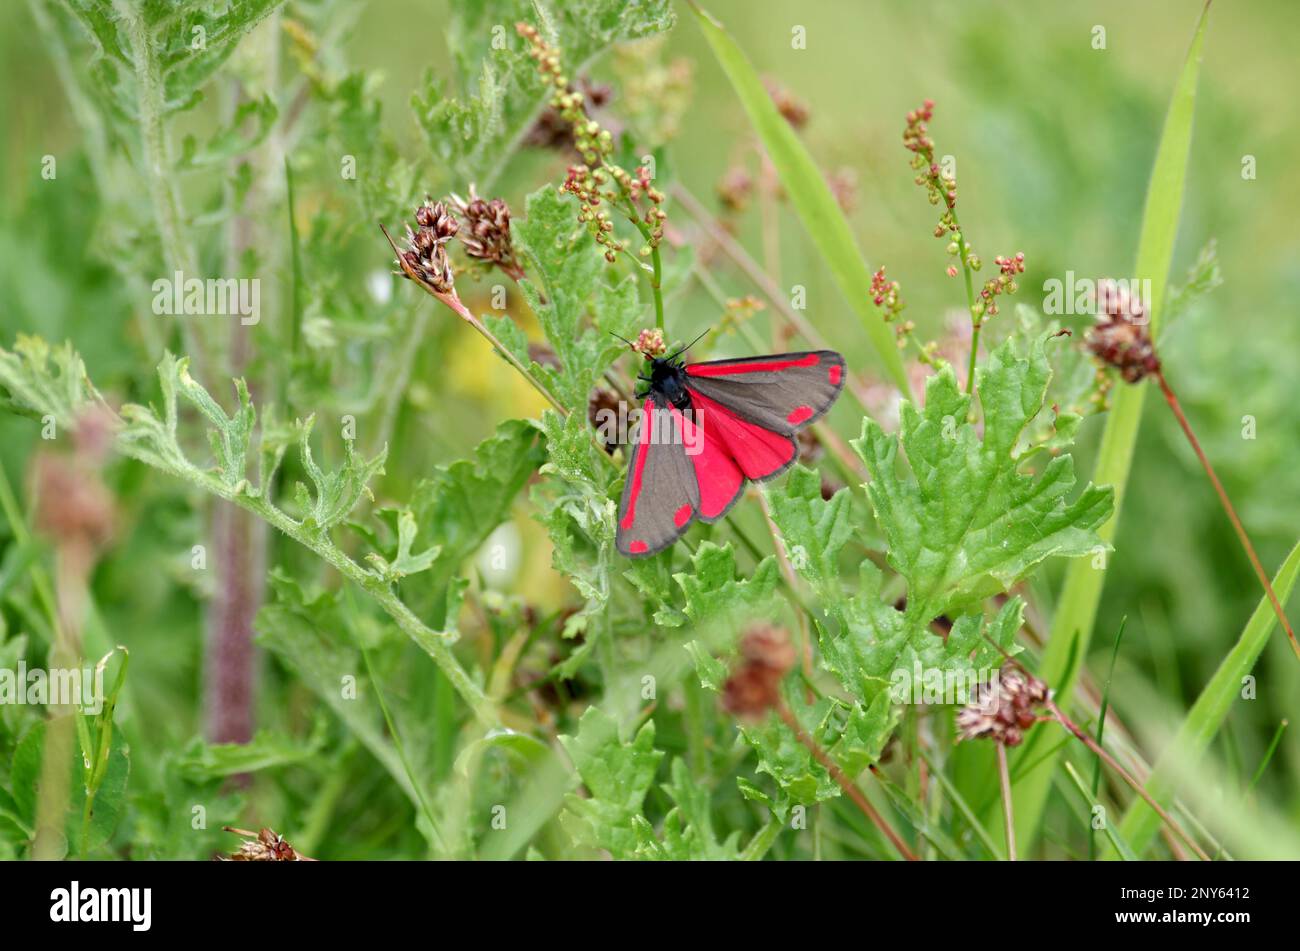 Cinnabar moth (Tyria jacobaeae), butterfly, moth, black, red, wings, meadow, The striking Jacobs weed bear sits on green leaves in a meadow Stock Photo